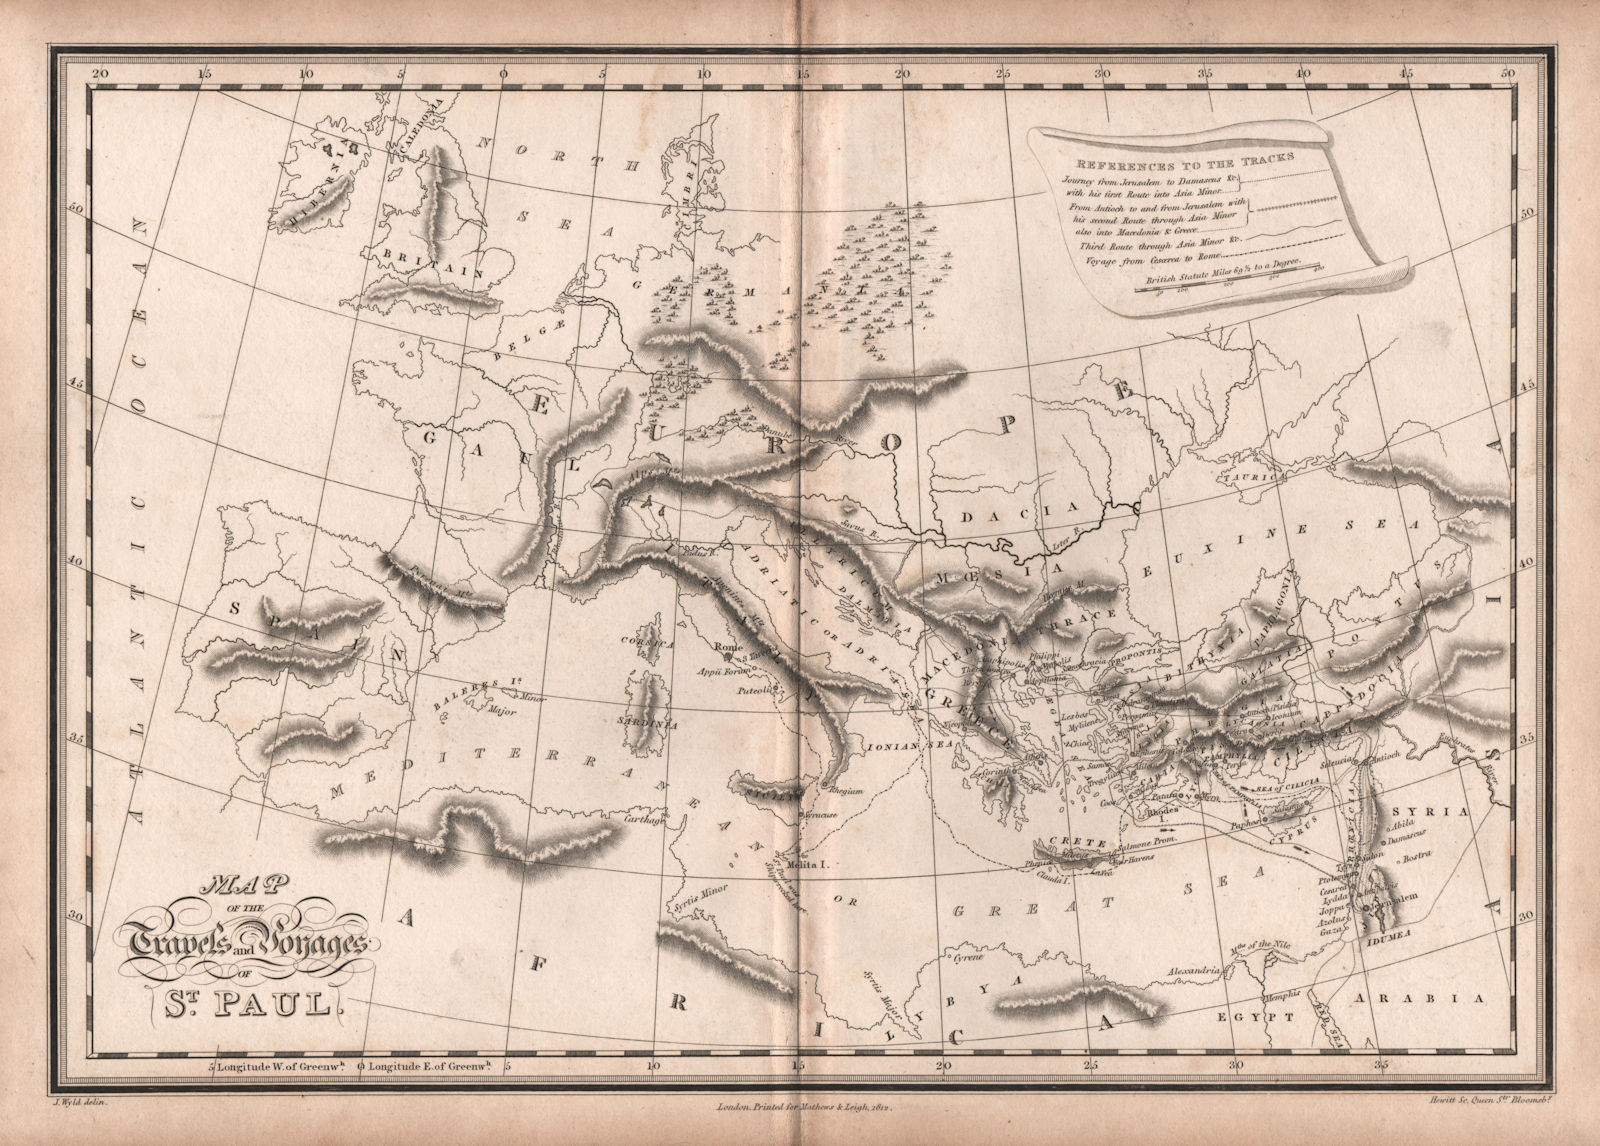 Associate Product Map of the Travels and Voyages of St. Paul. Mediterranean. WYLD 1812 old